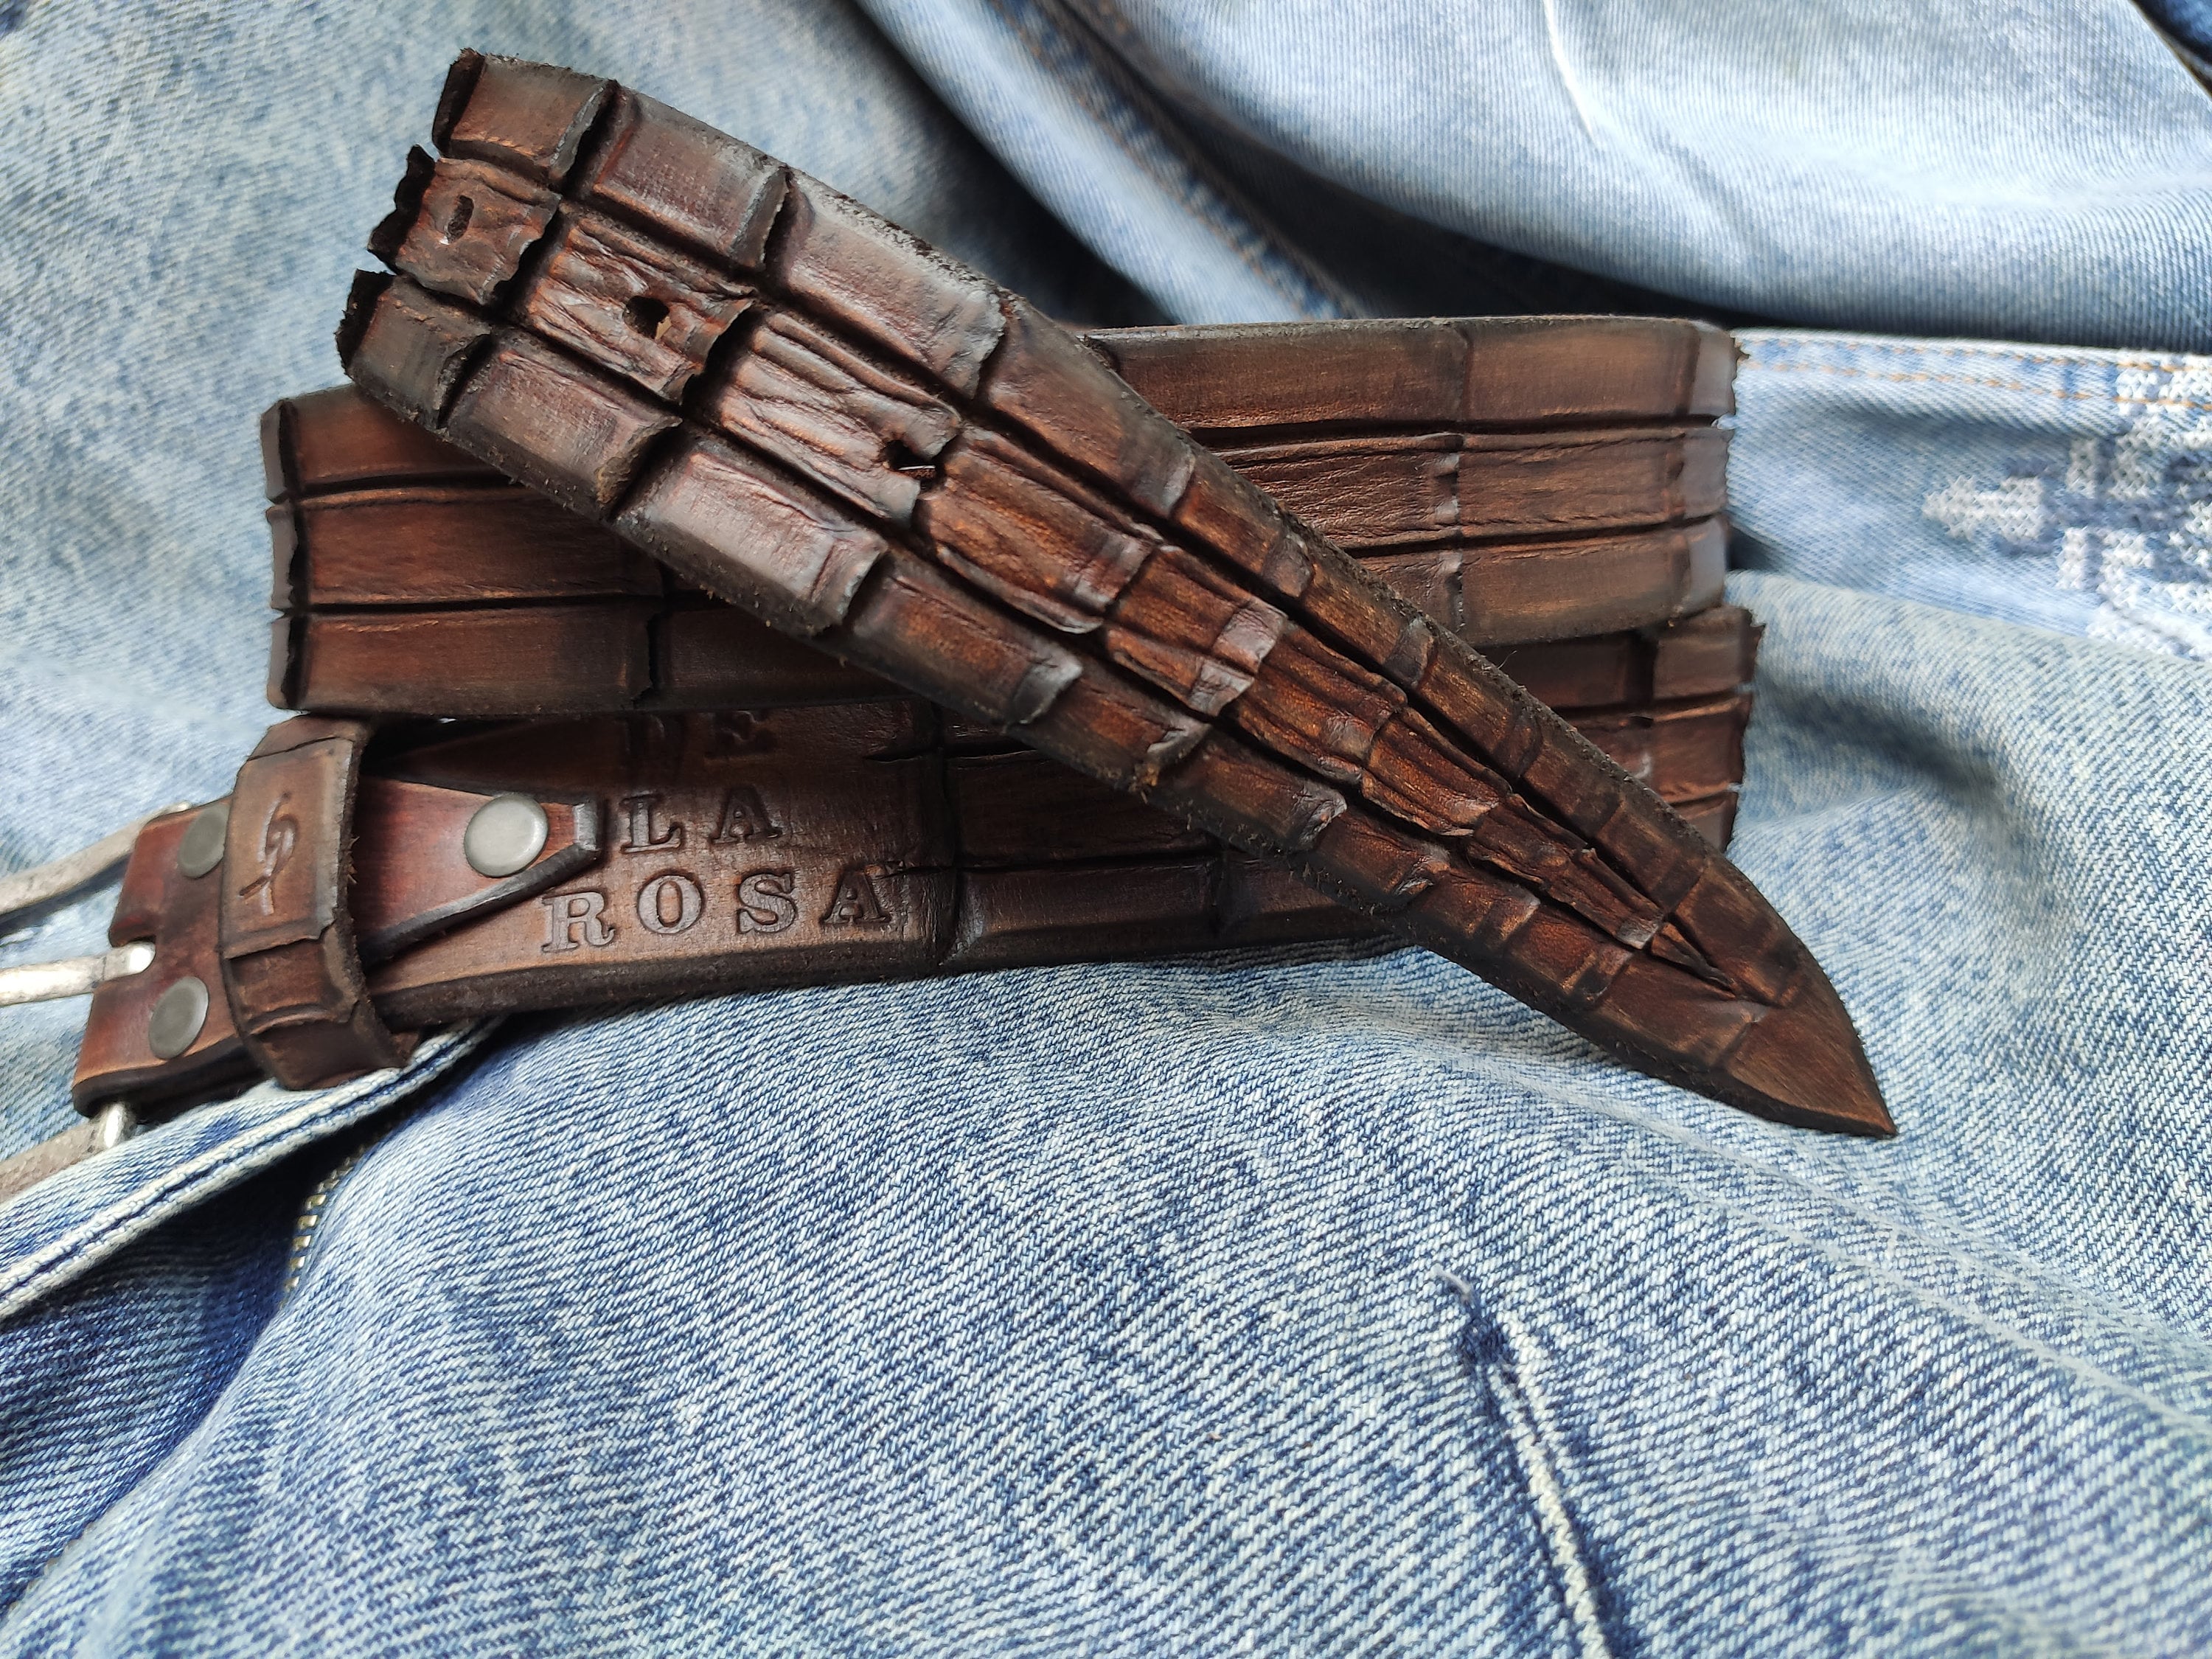 Brown leather belt with handmade cuts in the shape and texture of a crocodile